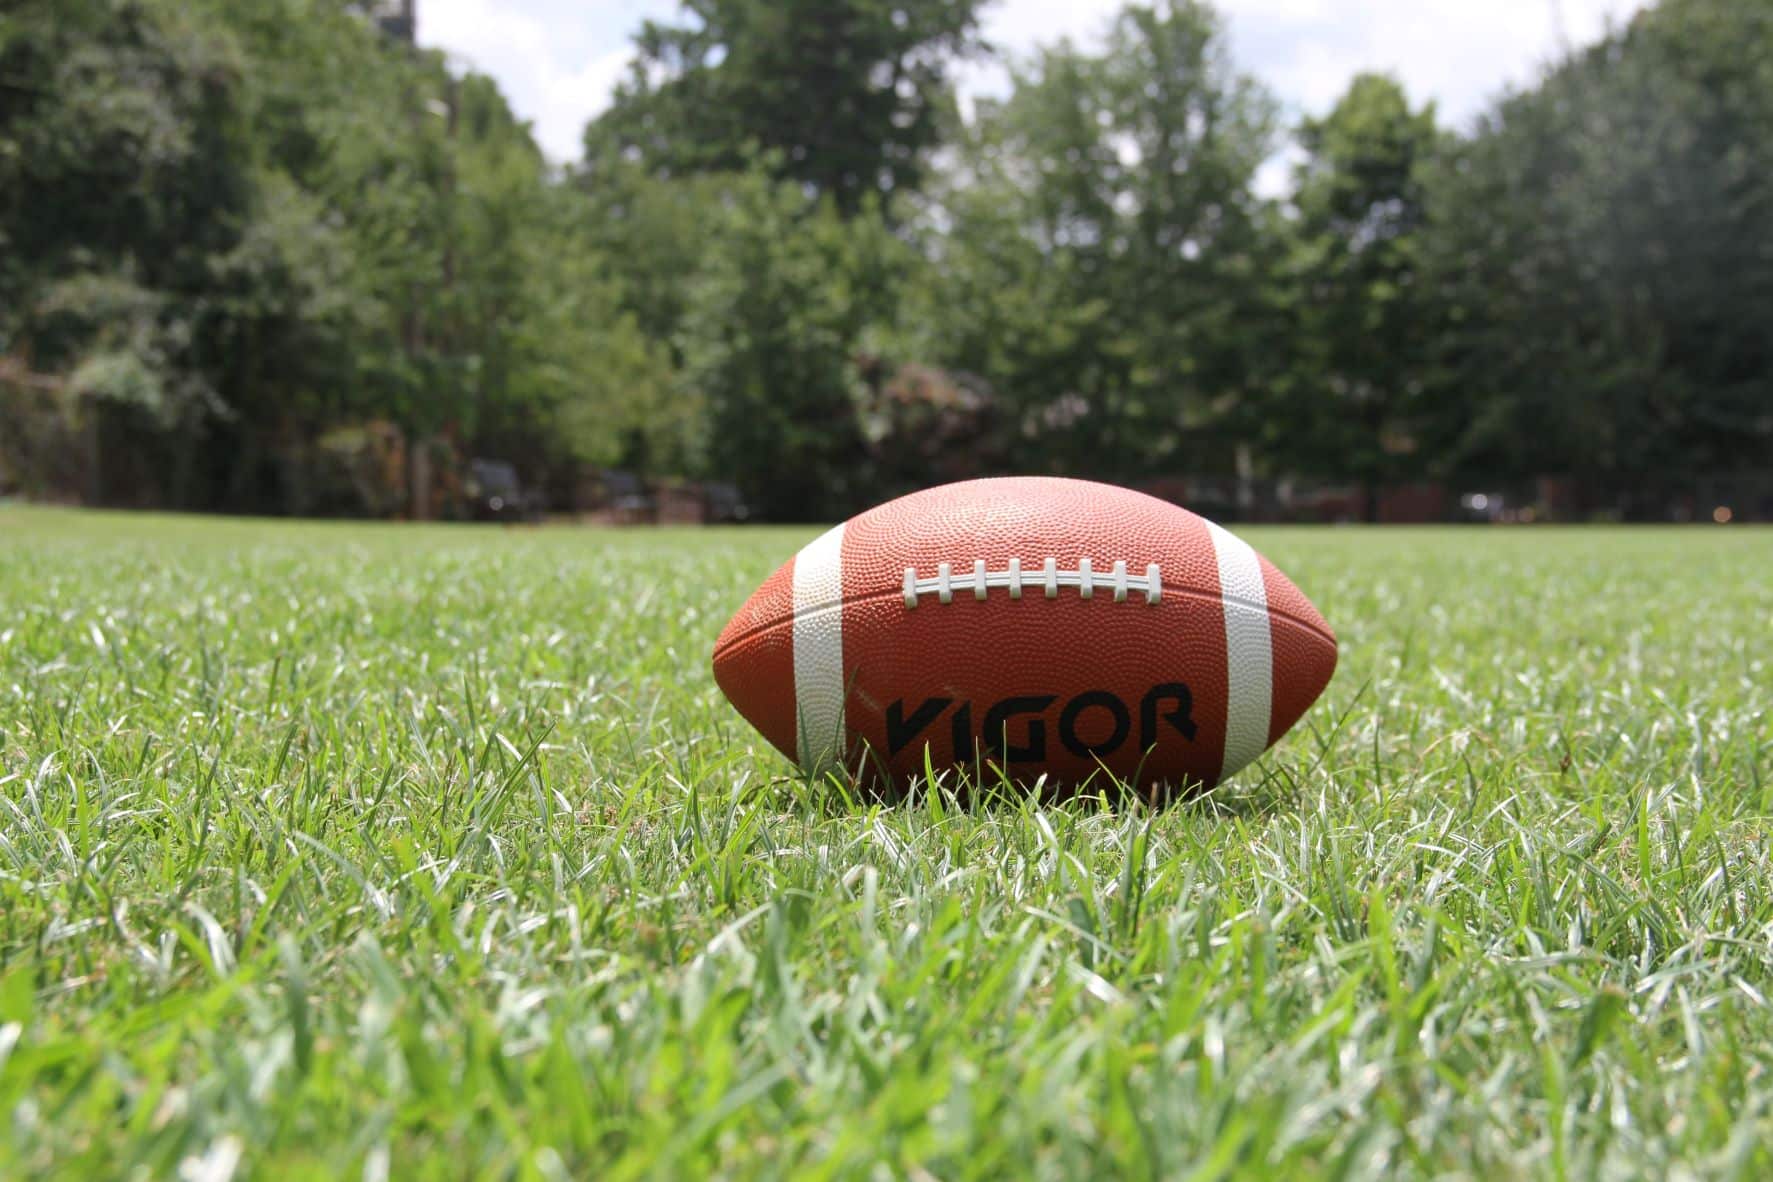 football laying on open grass field